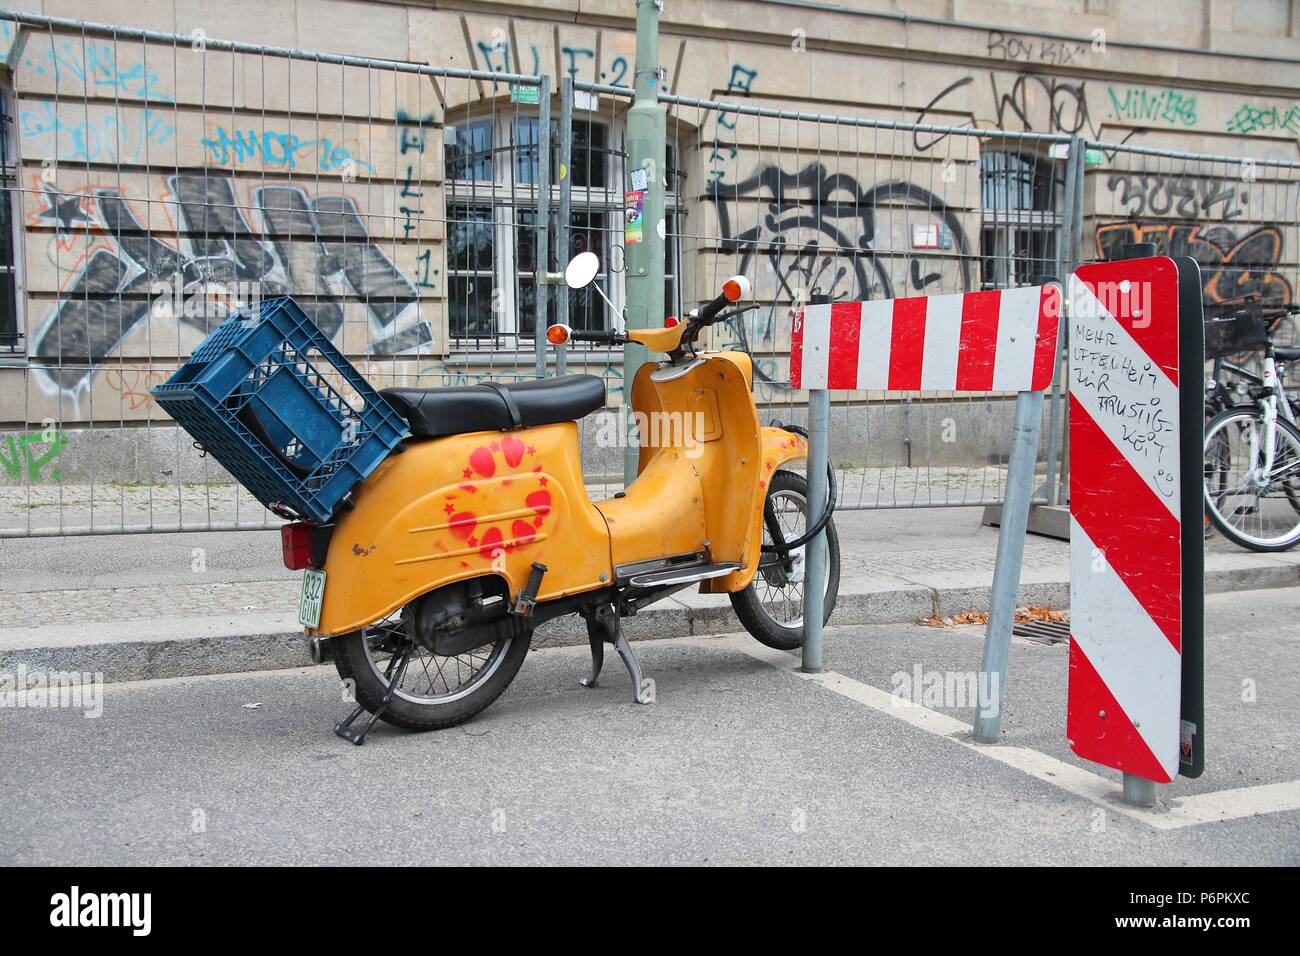 BERLIN, GERMANY - AUGUST 25, 2014: Simson Schwalbe oldtimer scooter parked in Berlin. More than 900 thousand were produced in 1959-1986. Stock Photo